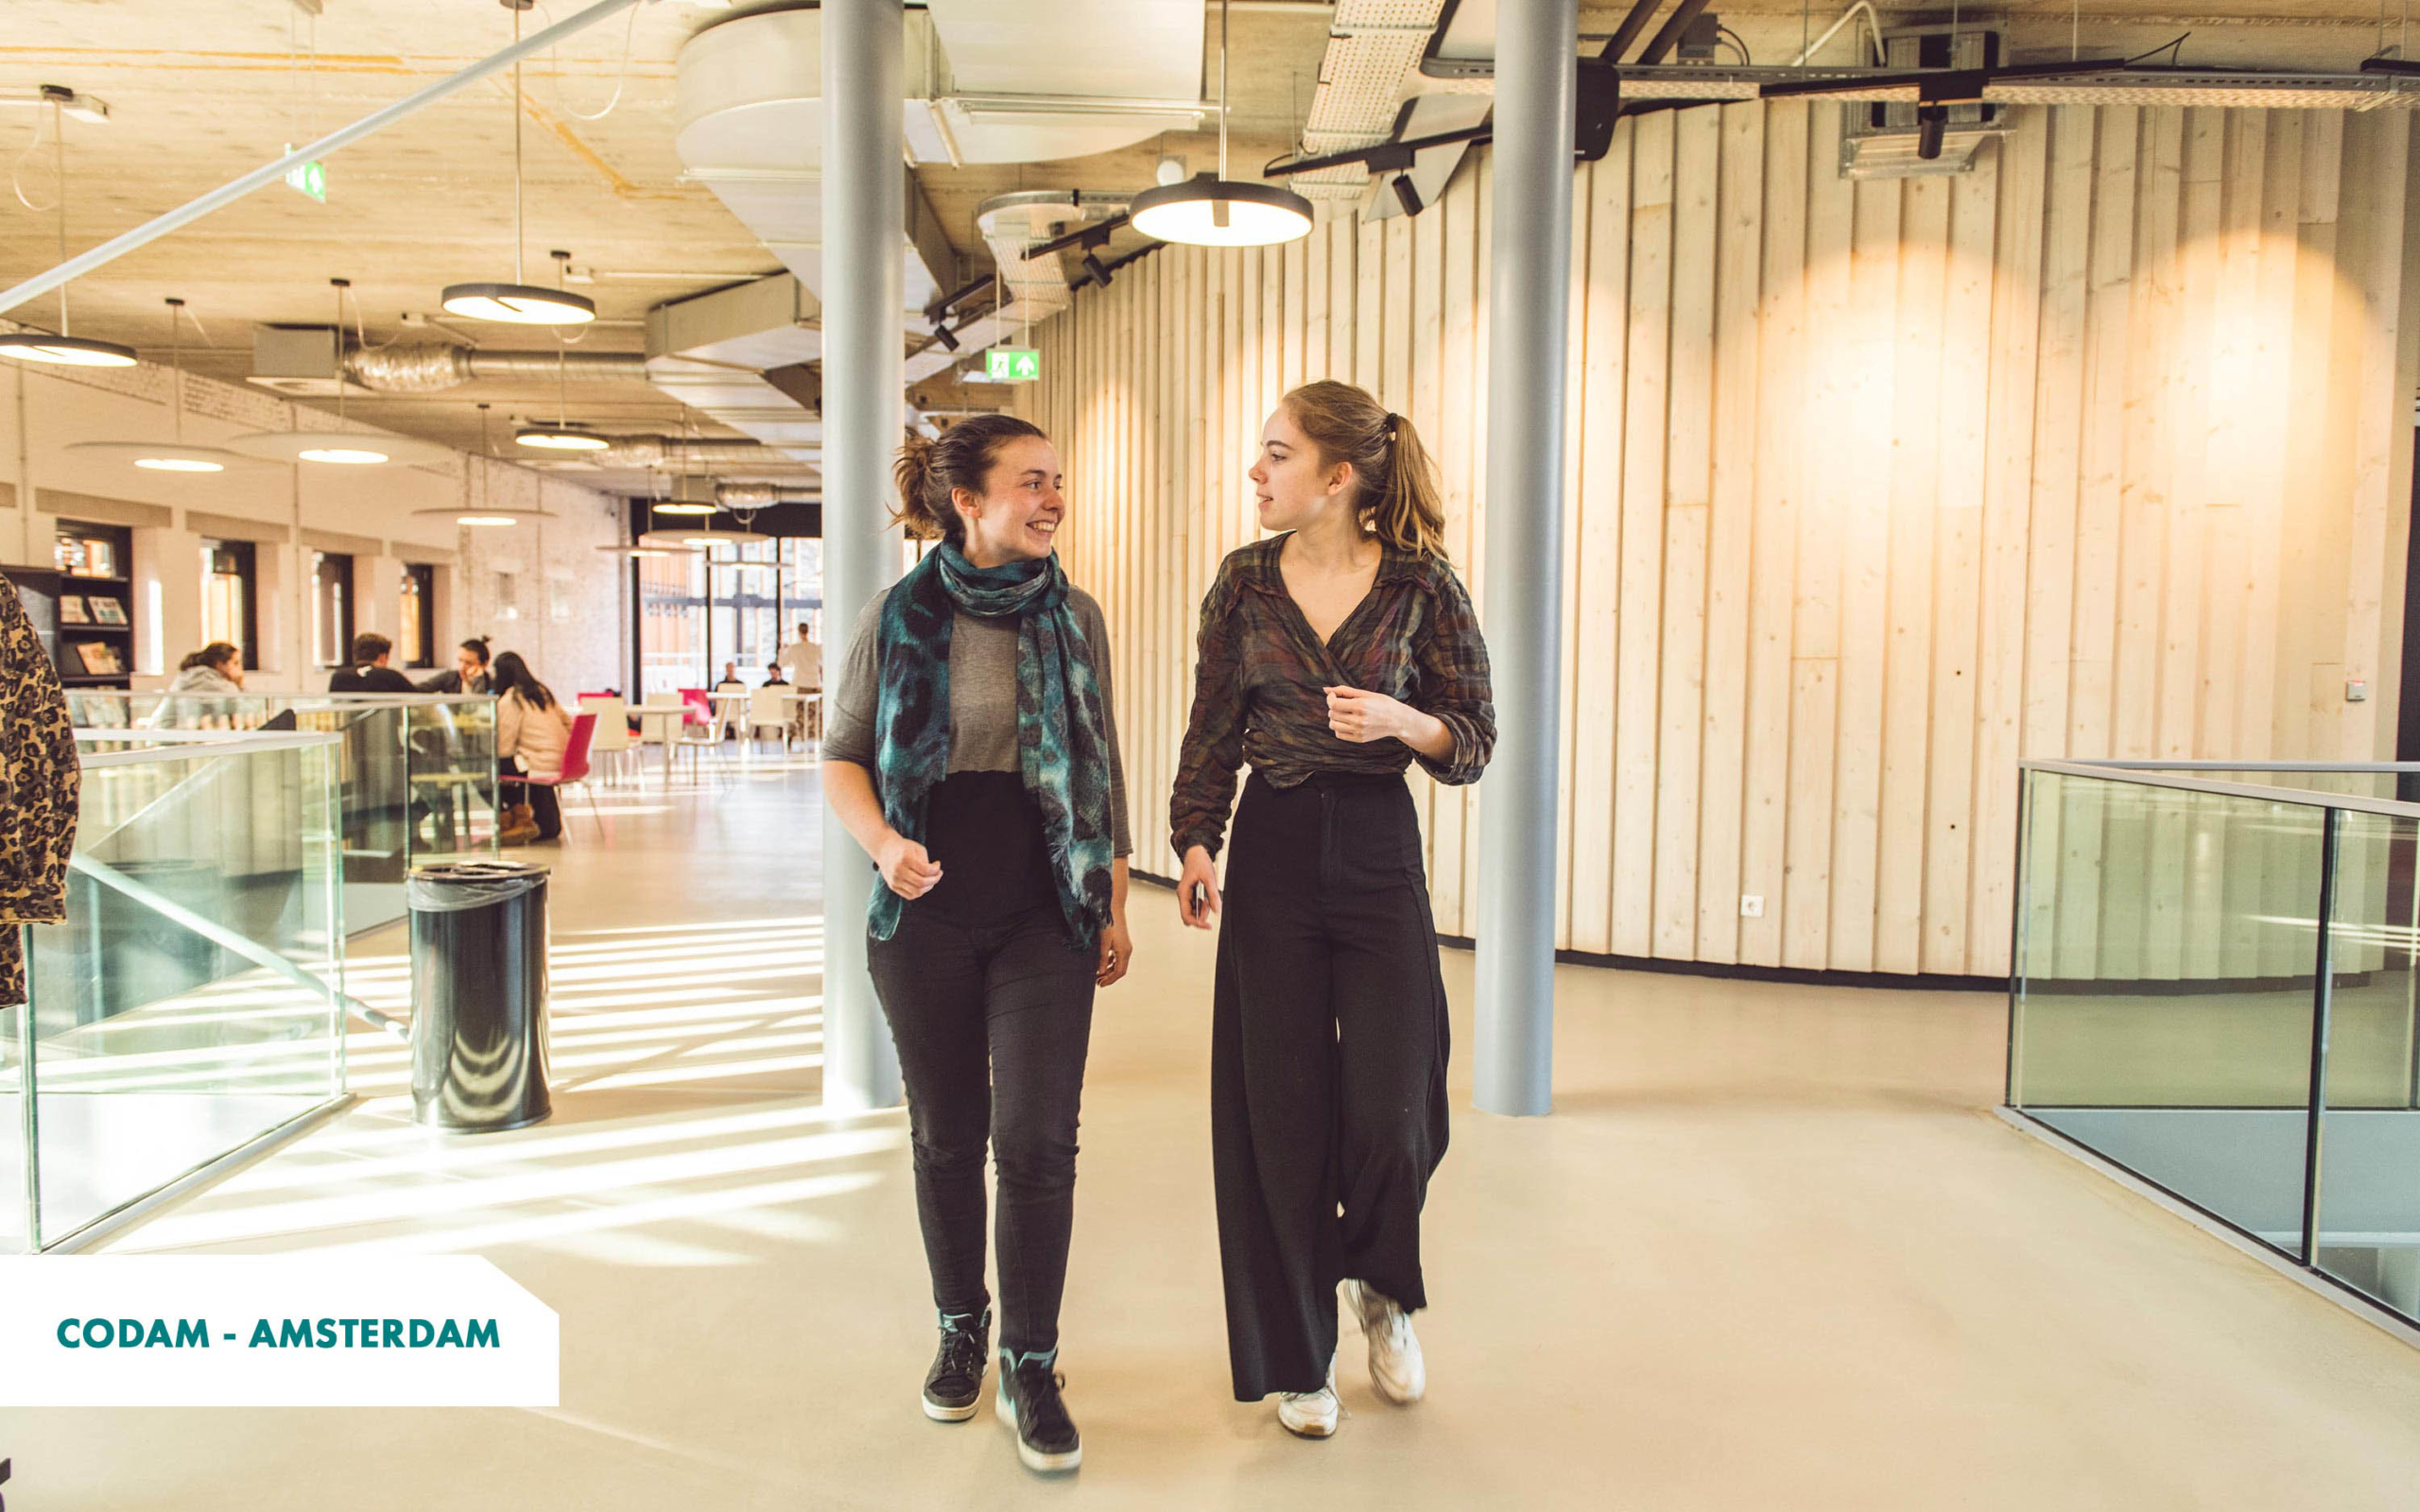 2 women talking while walking in the lighted corridors of Codam's campus (The Netherlands)